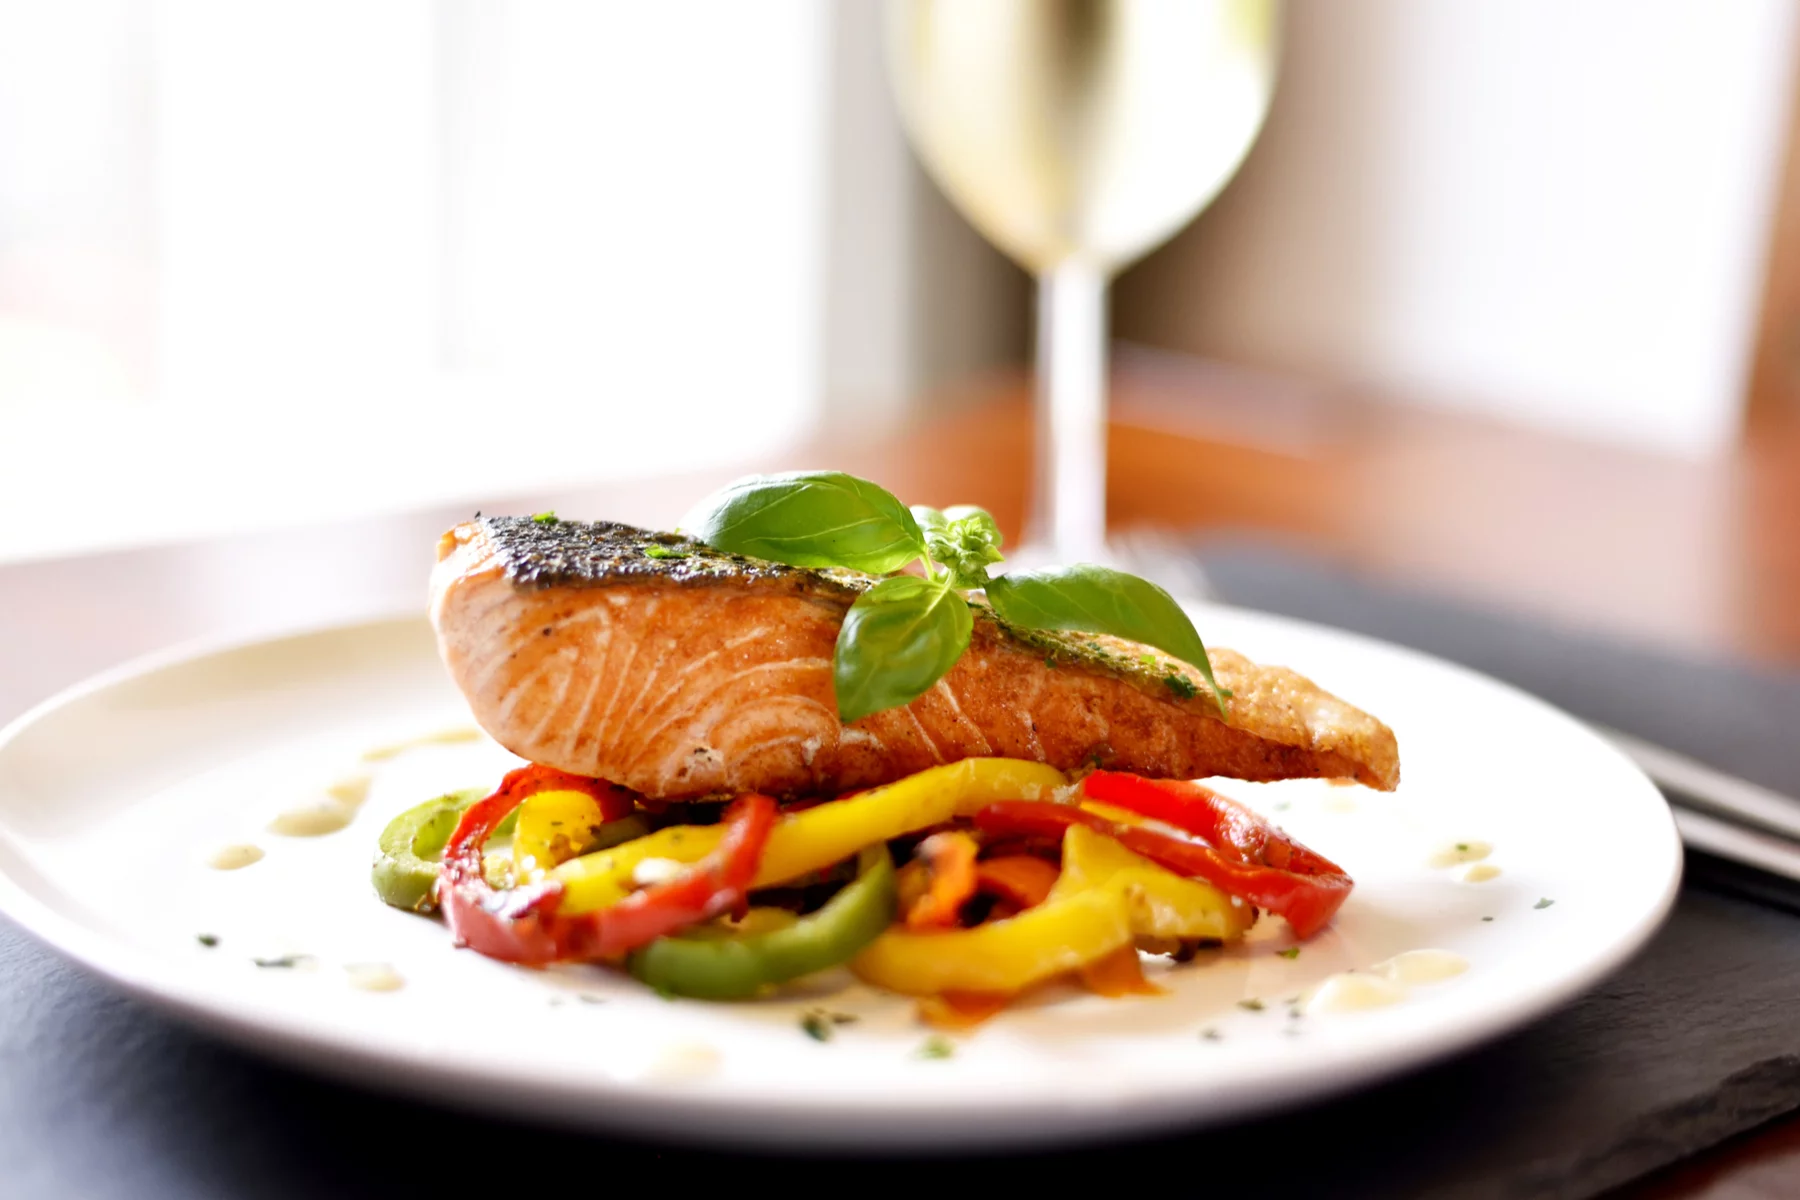 Salmon dinner with a glass of white wine